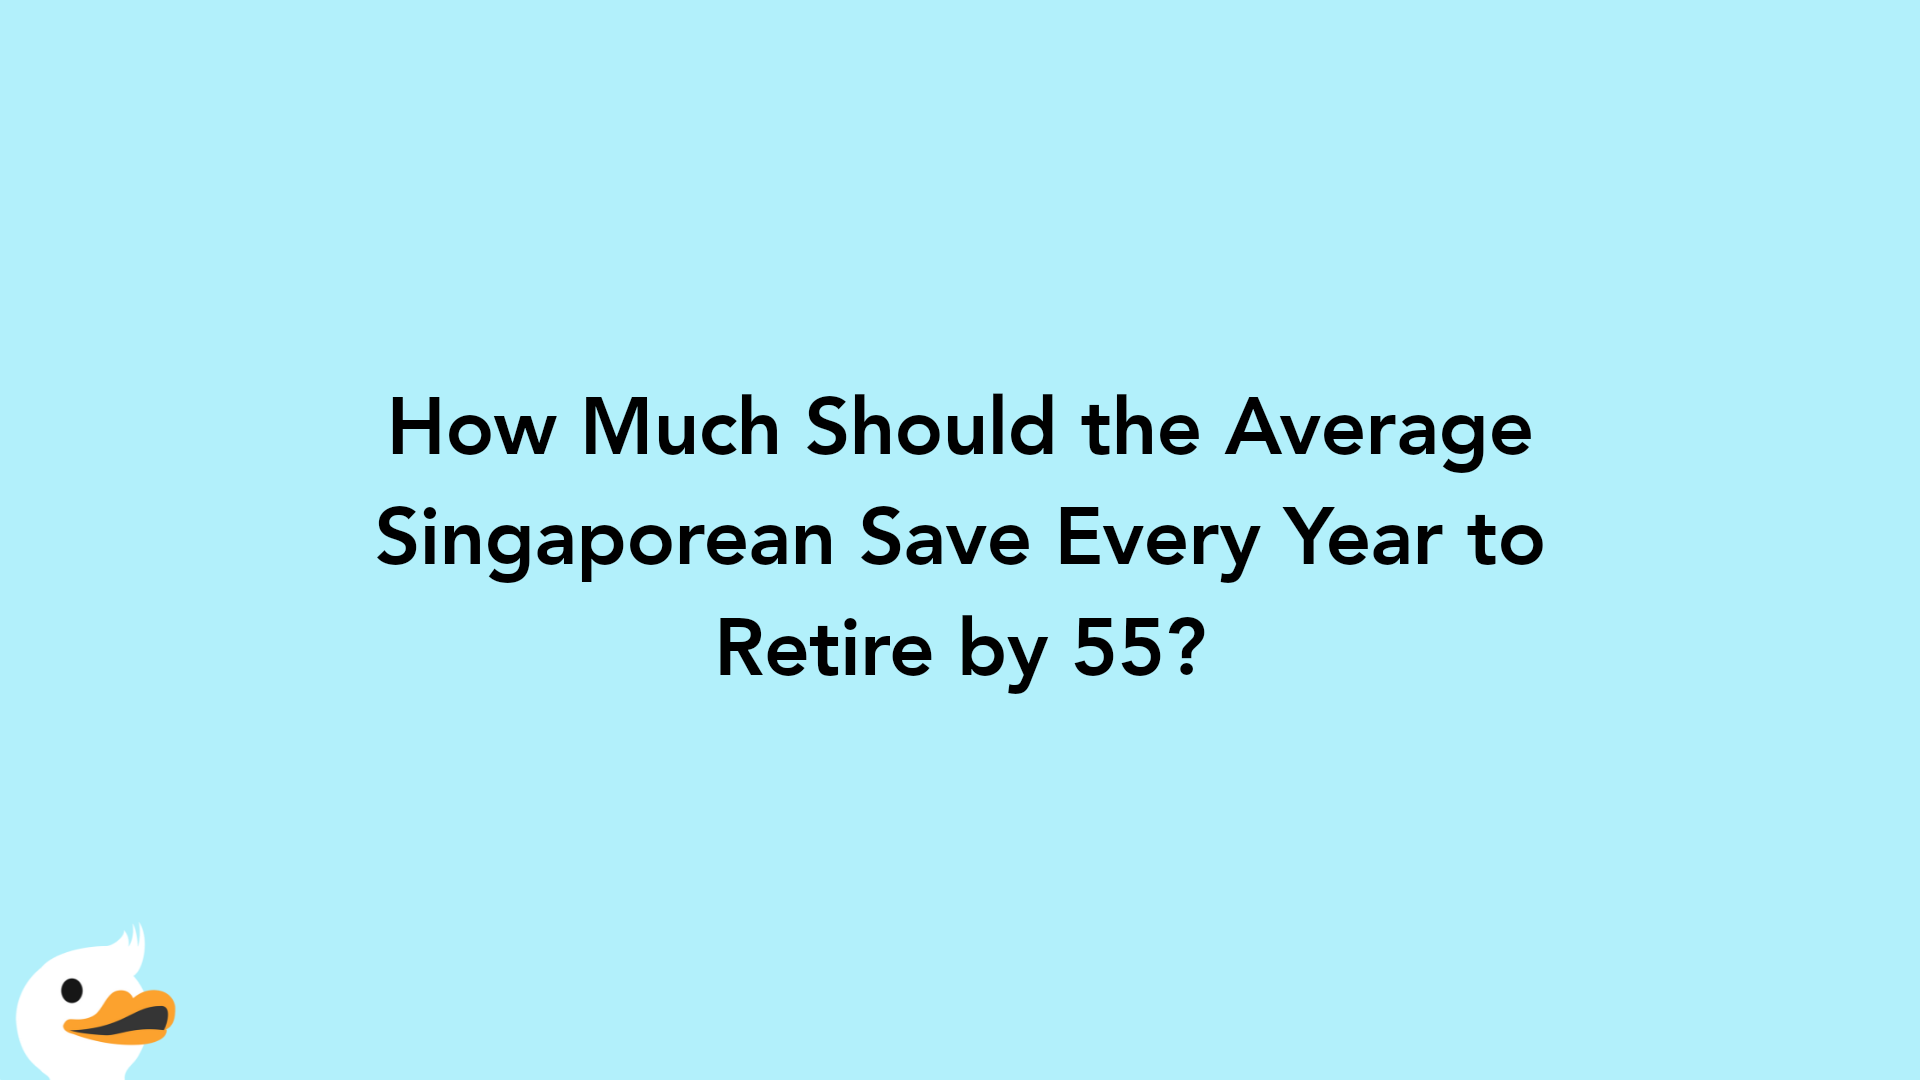 How Much Should the Average Singaporean Save Every Year to Retire by 55?